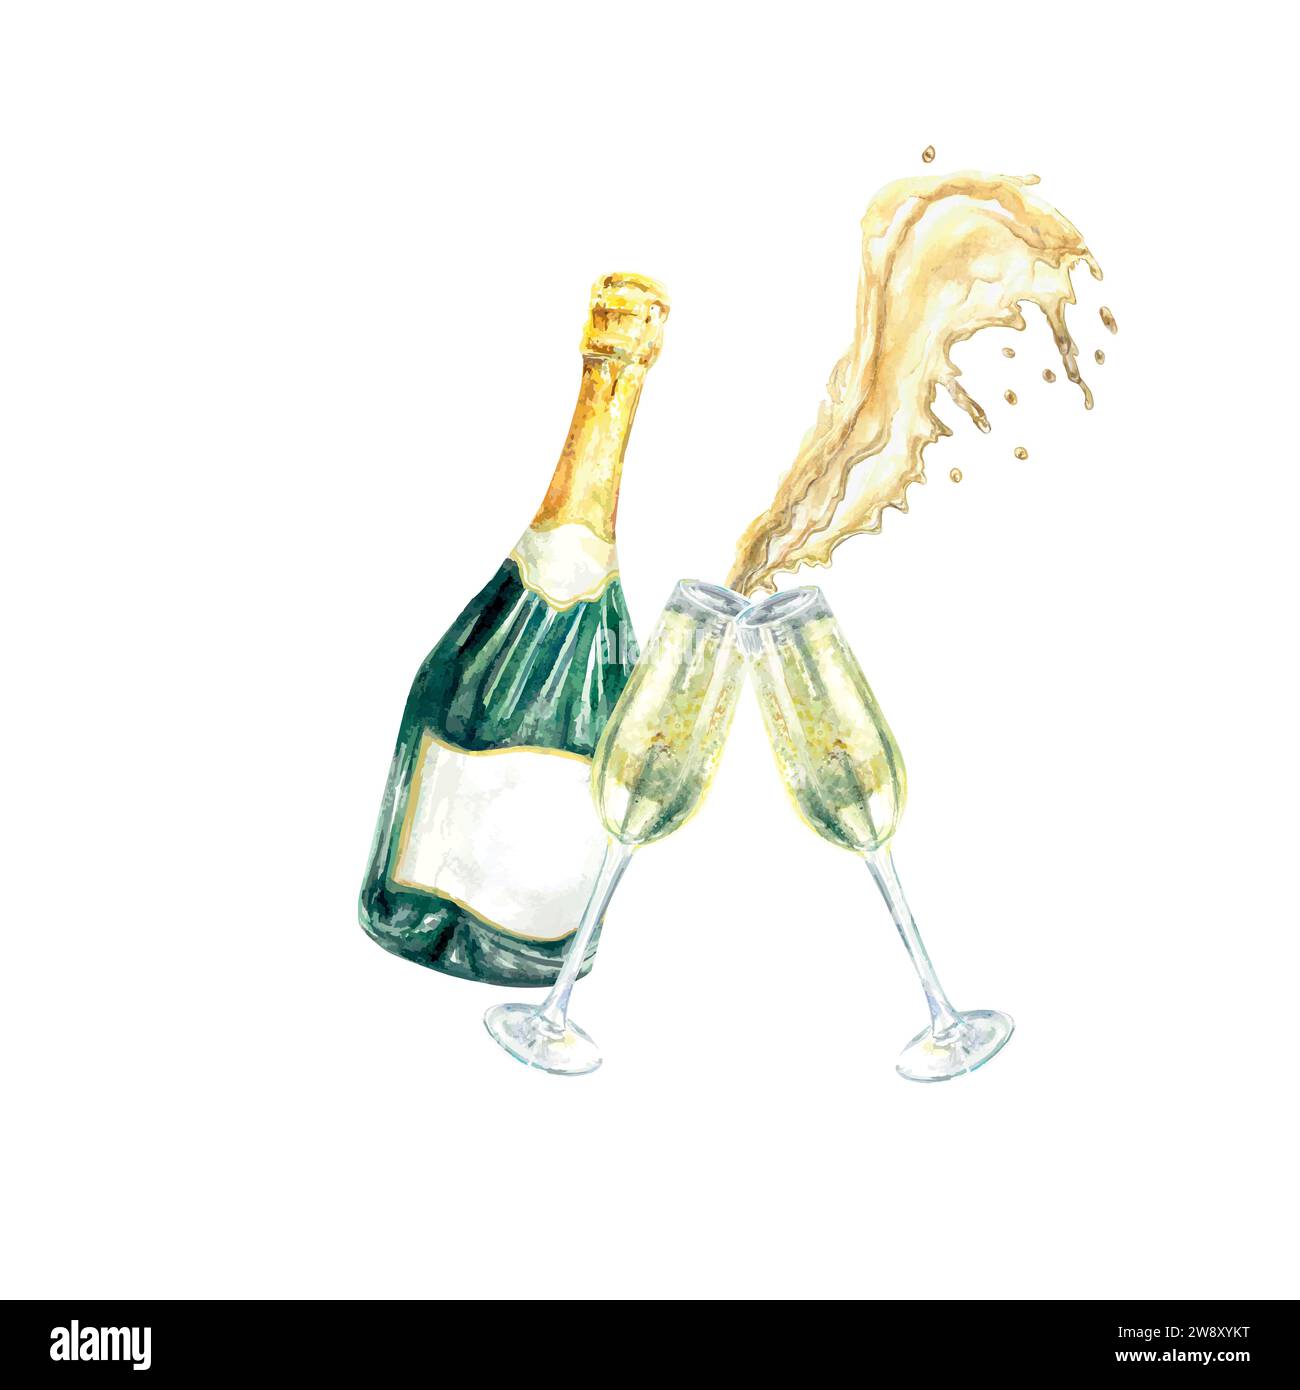 Champagne splashes watercolor. Bottle, glasses of champagne. Greeting cards, wedding invitations, banners, posters, birthday, festivals, new year. Stock Vector